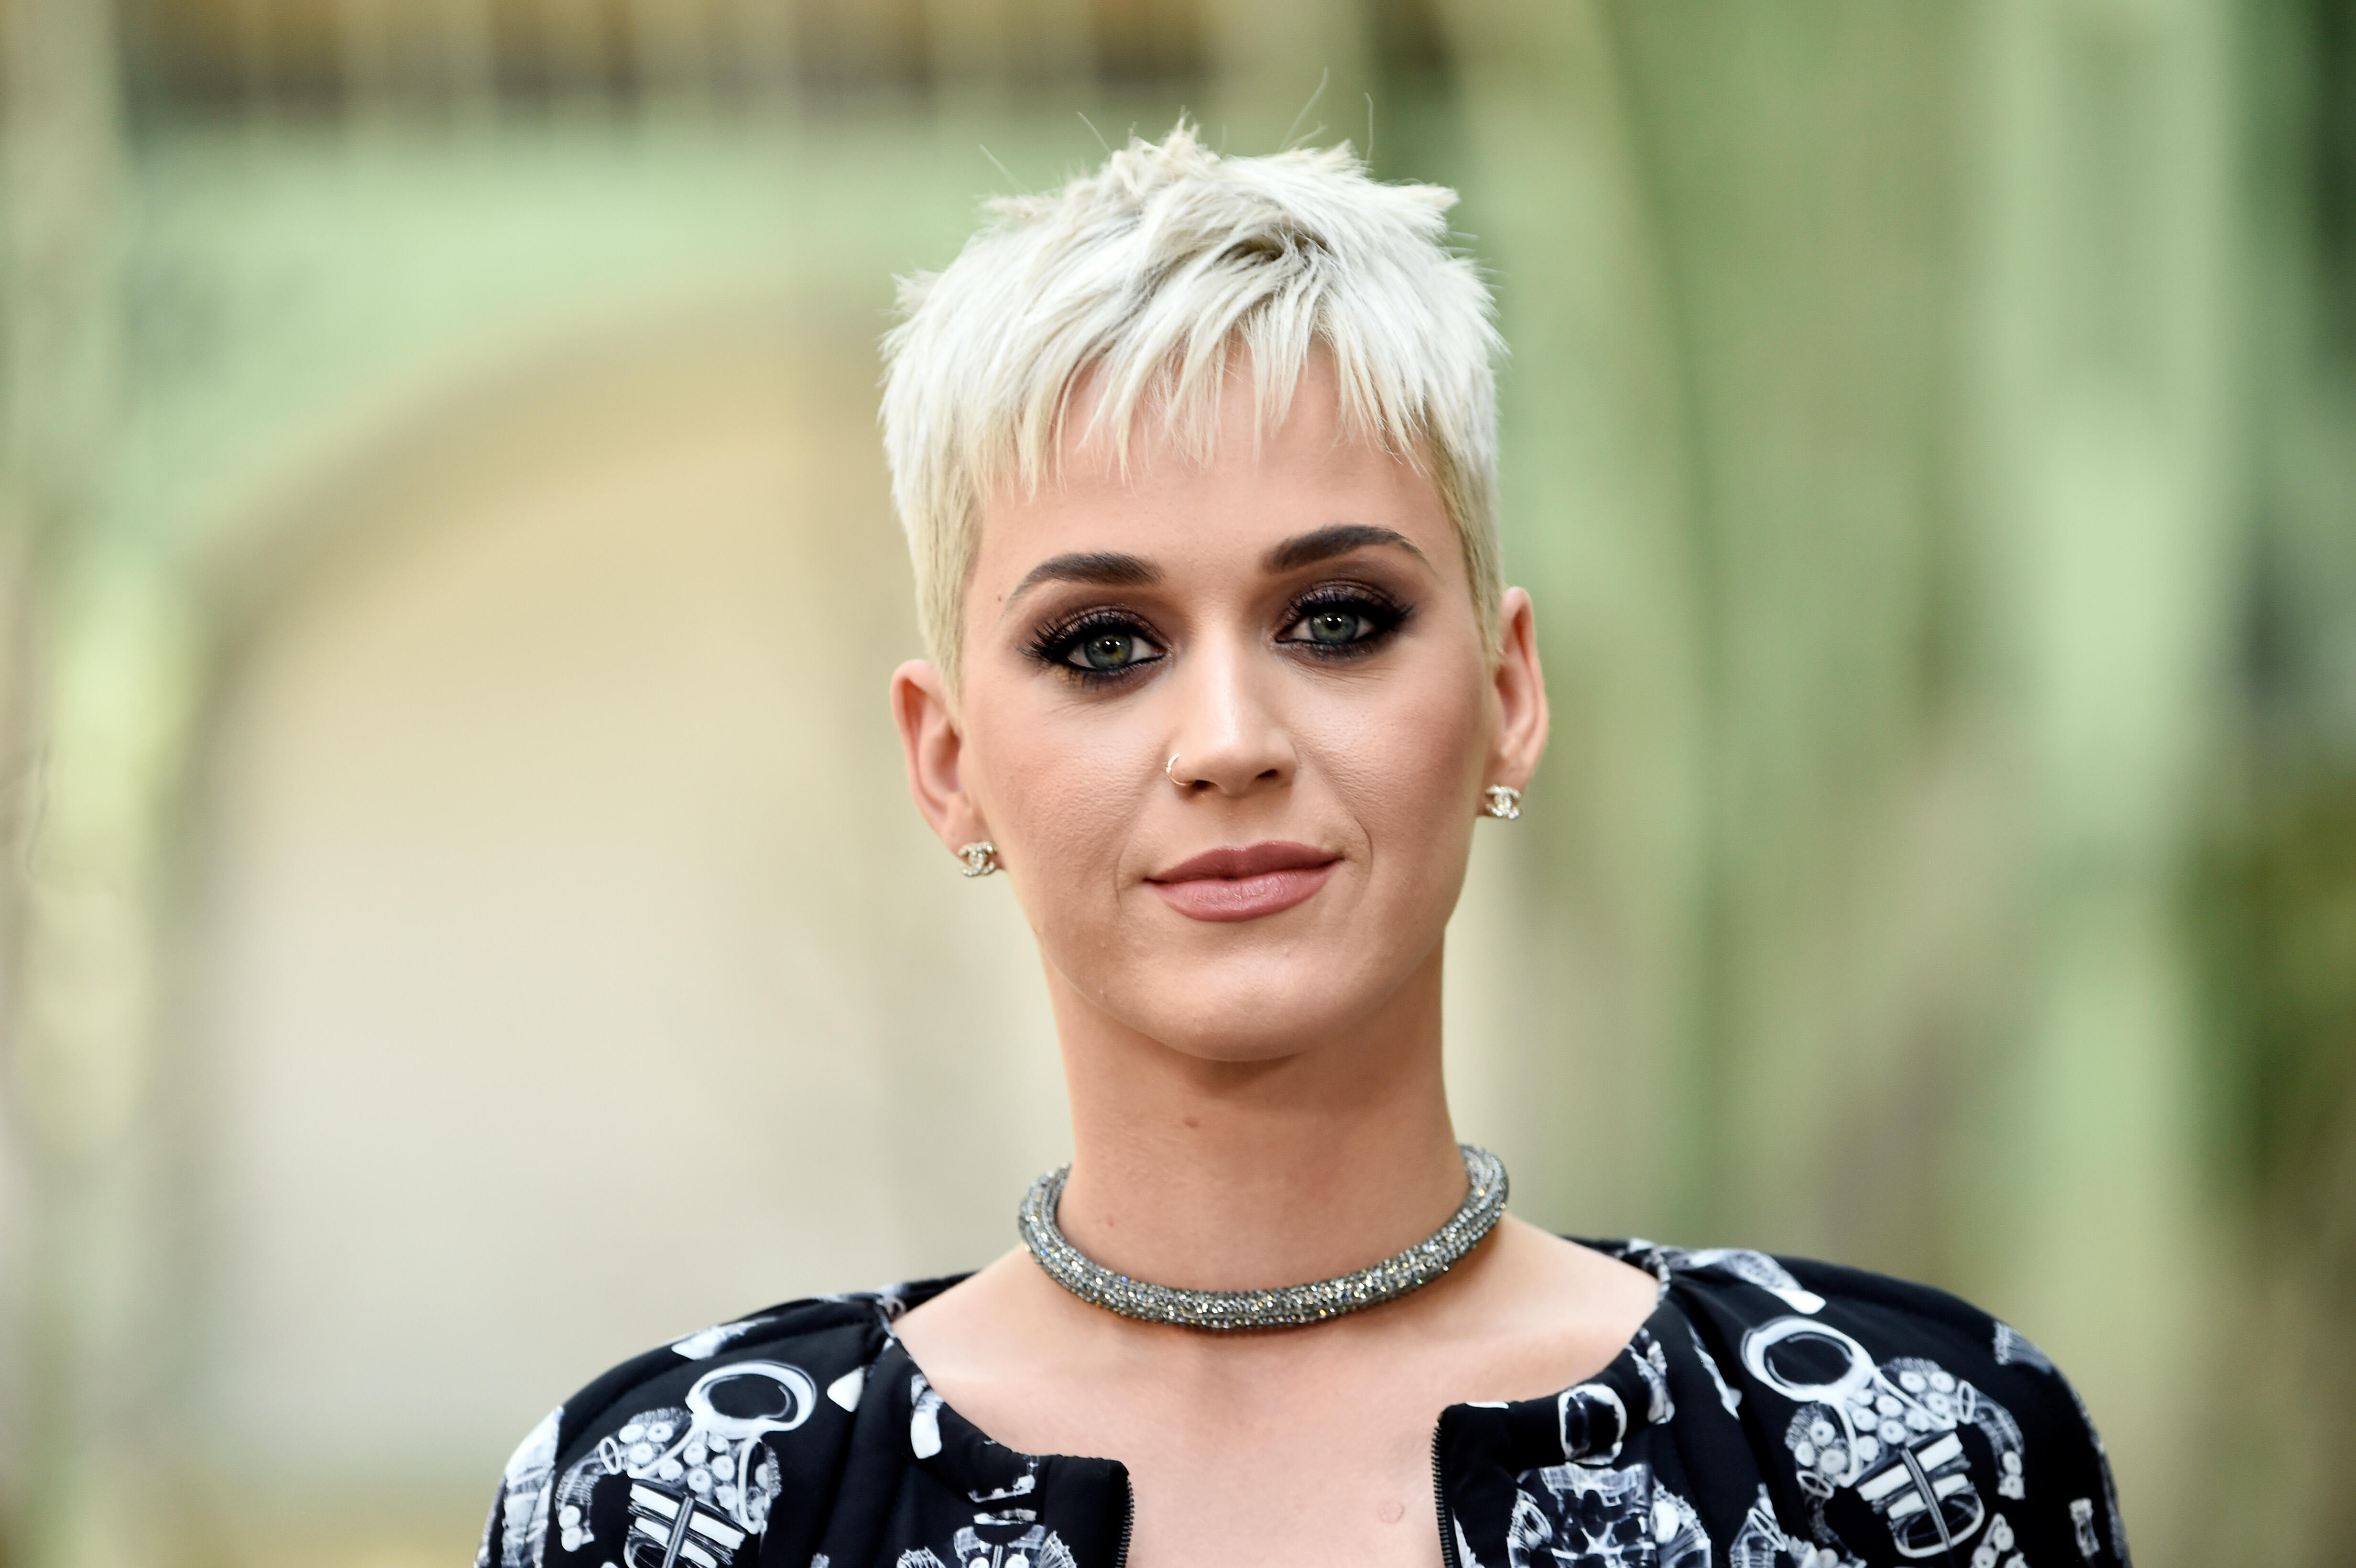 9. Katy Perry's Blue Hair: A Look Back at Her Colorful Hair ... - wide 6